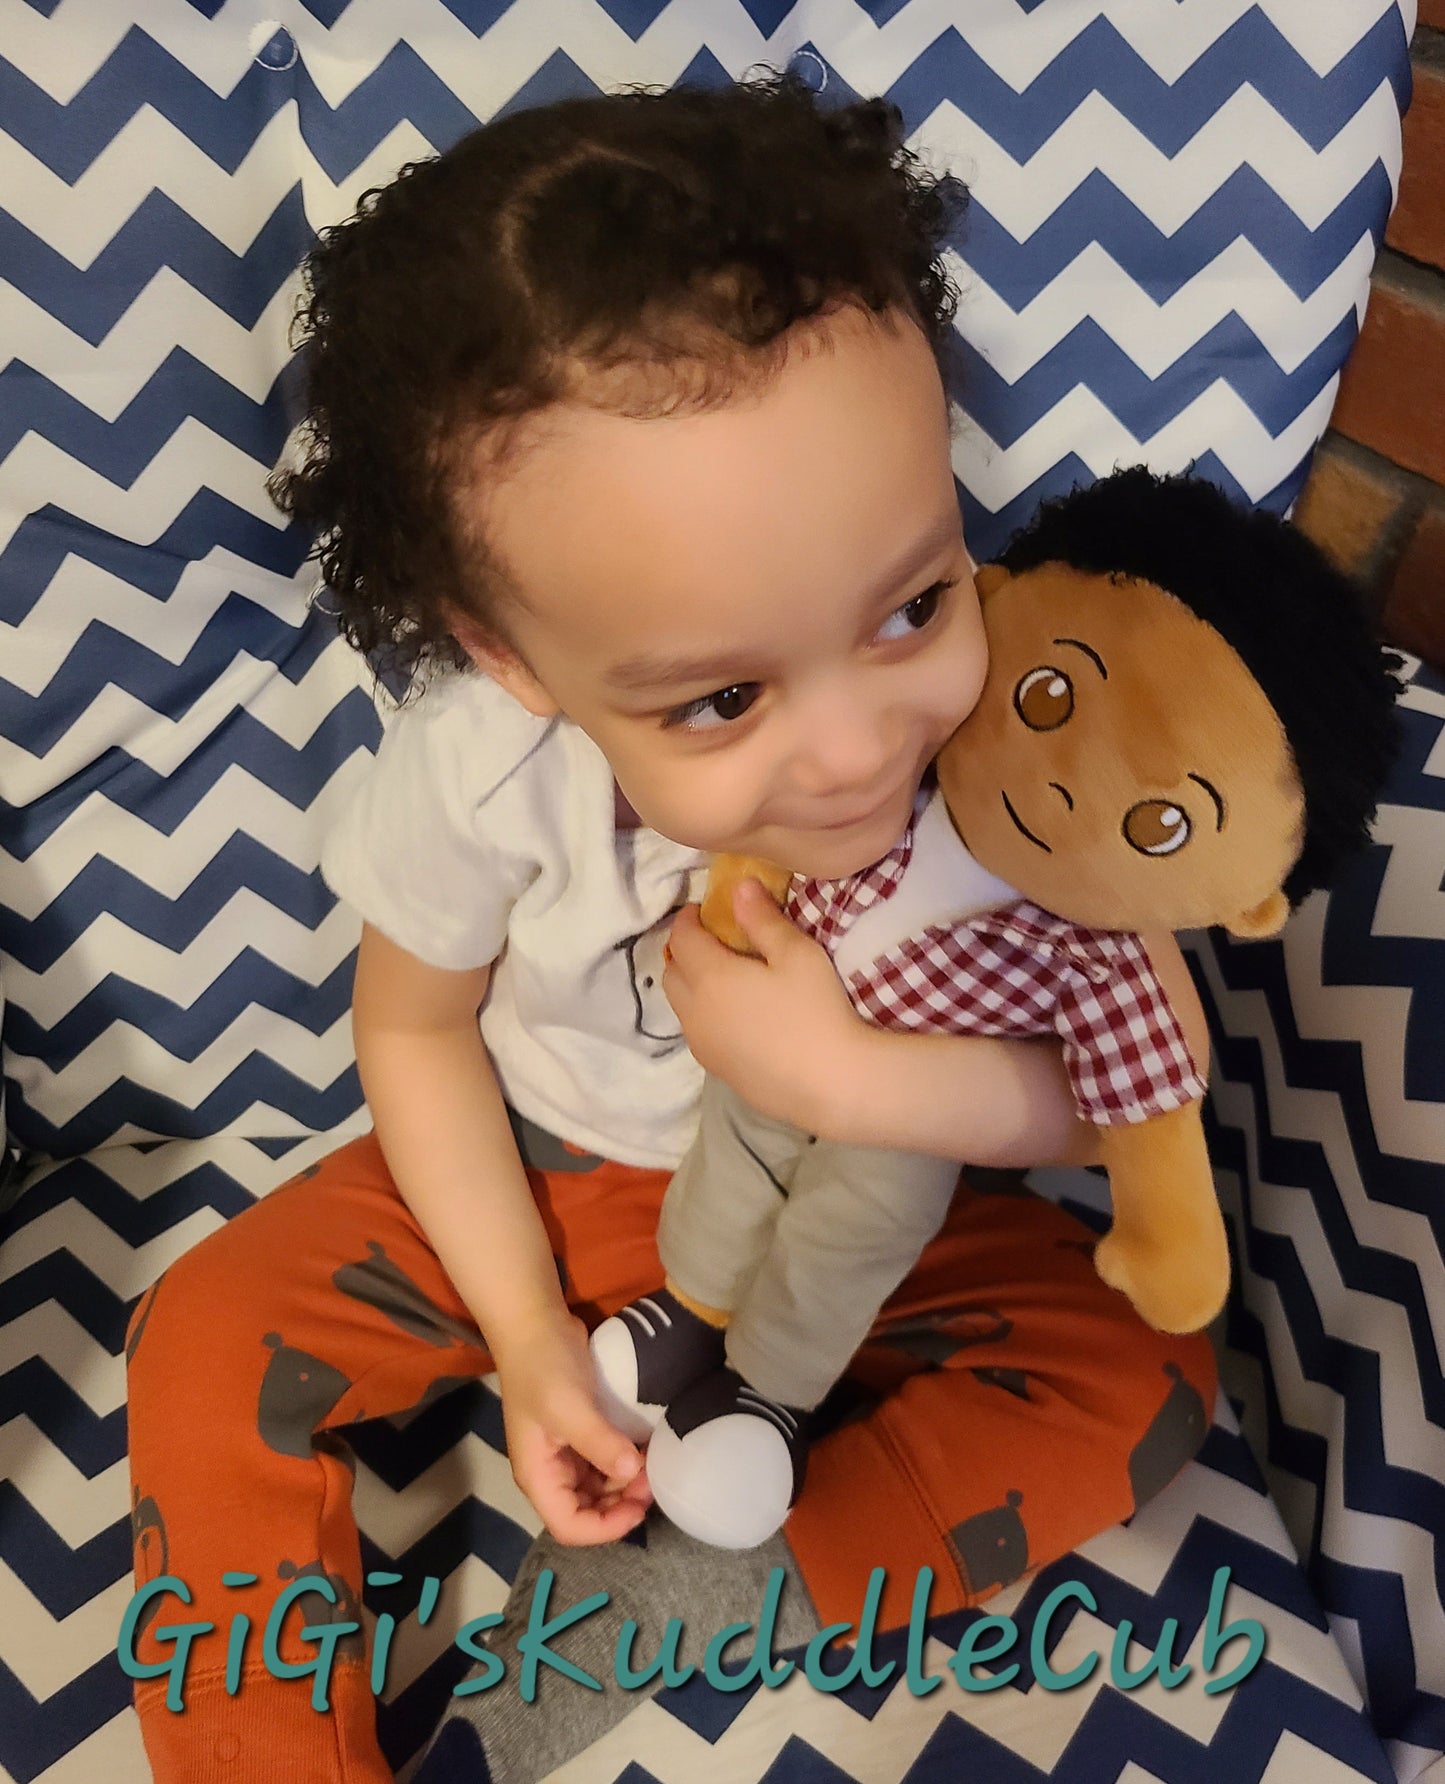 Personalized Bruno The Cool Brown Boy Soft Rag 14in plush Doll Toy